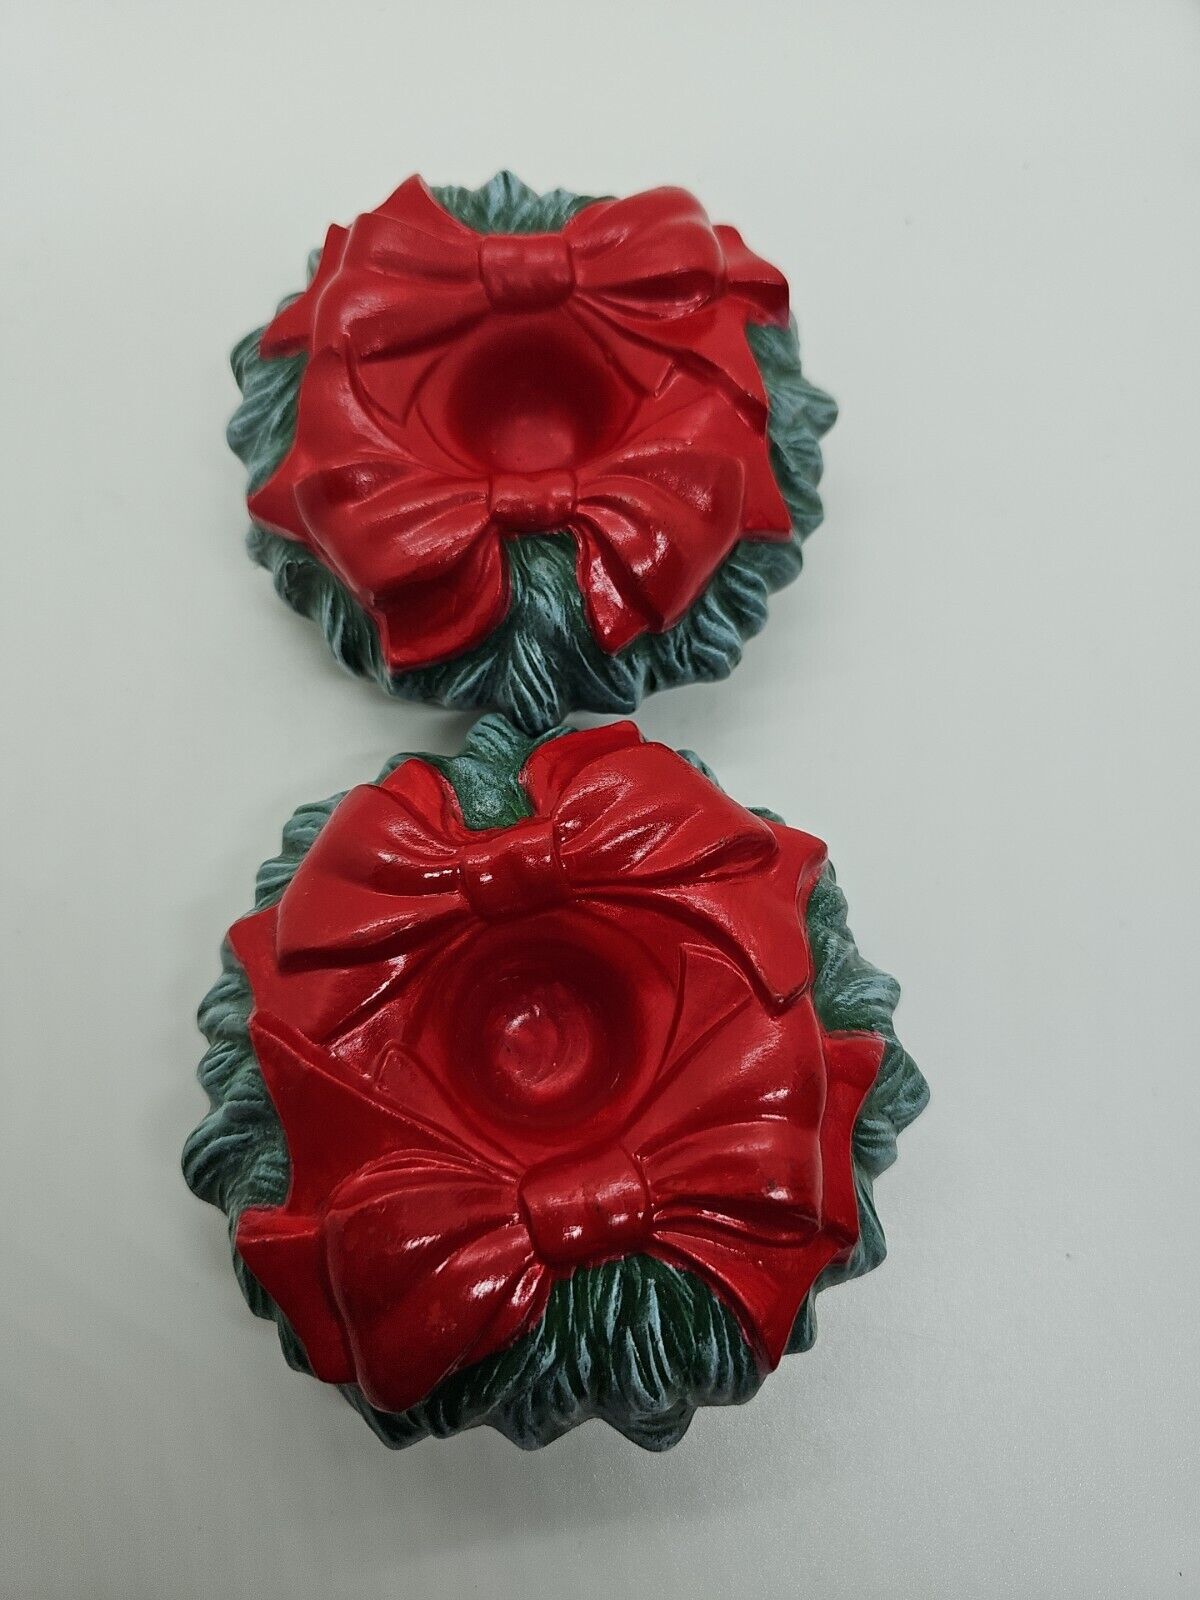 2 Vintage Tampa Mold Holiday Christmas Wreath Candle Holders 